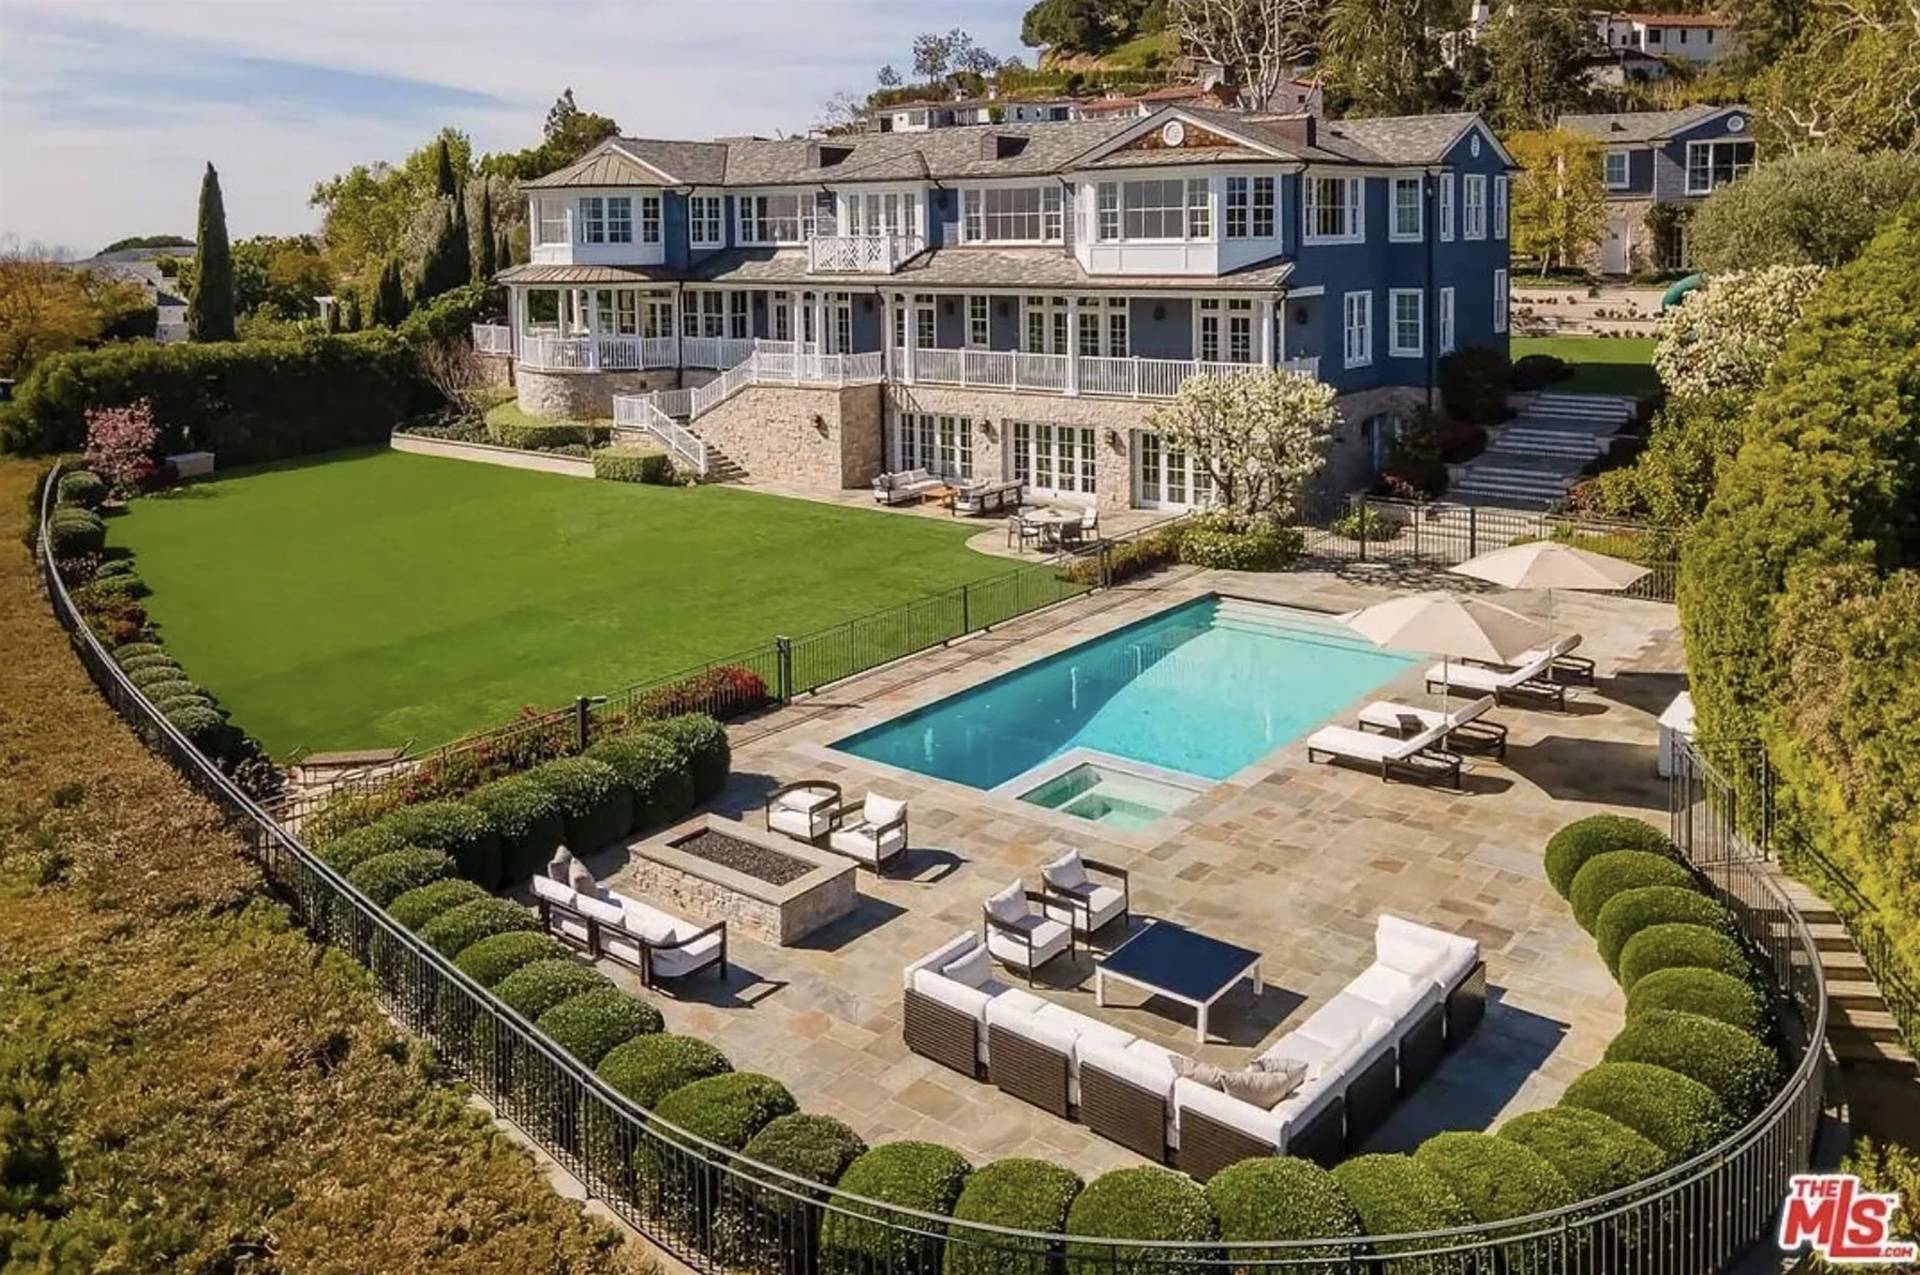 Bennifer bails out of $34.5 million mansion and moves on to new stunning $64 million estate